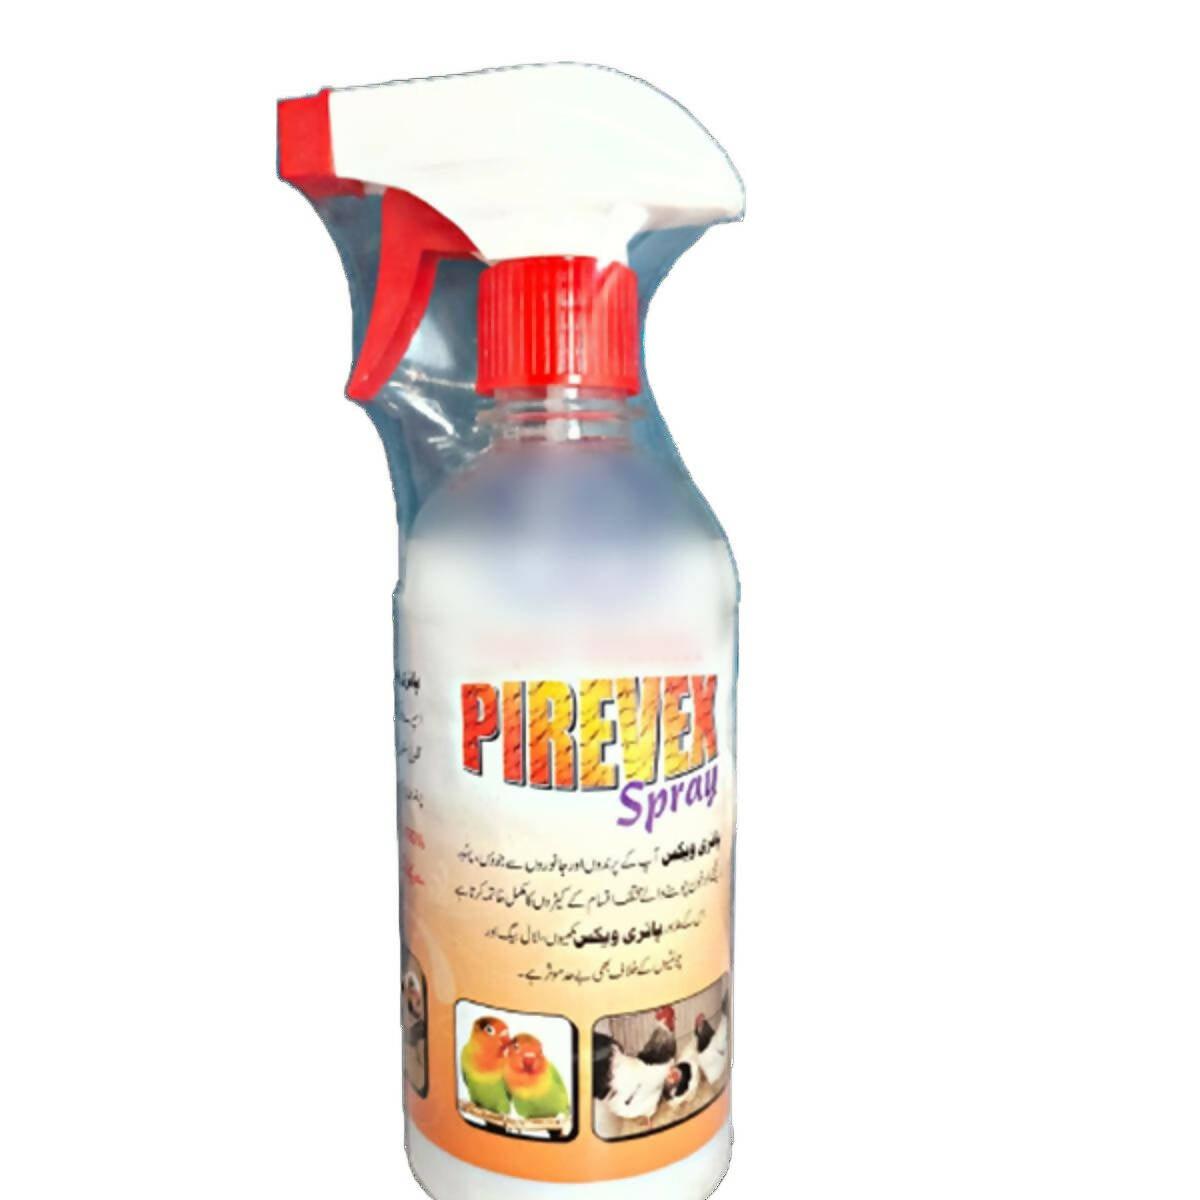 Pirevex Spray -Anti Lice - For Birds - Animals - With Spray - For Parrots Finches & Poultry Chicken - ValueBox